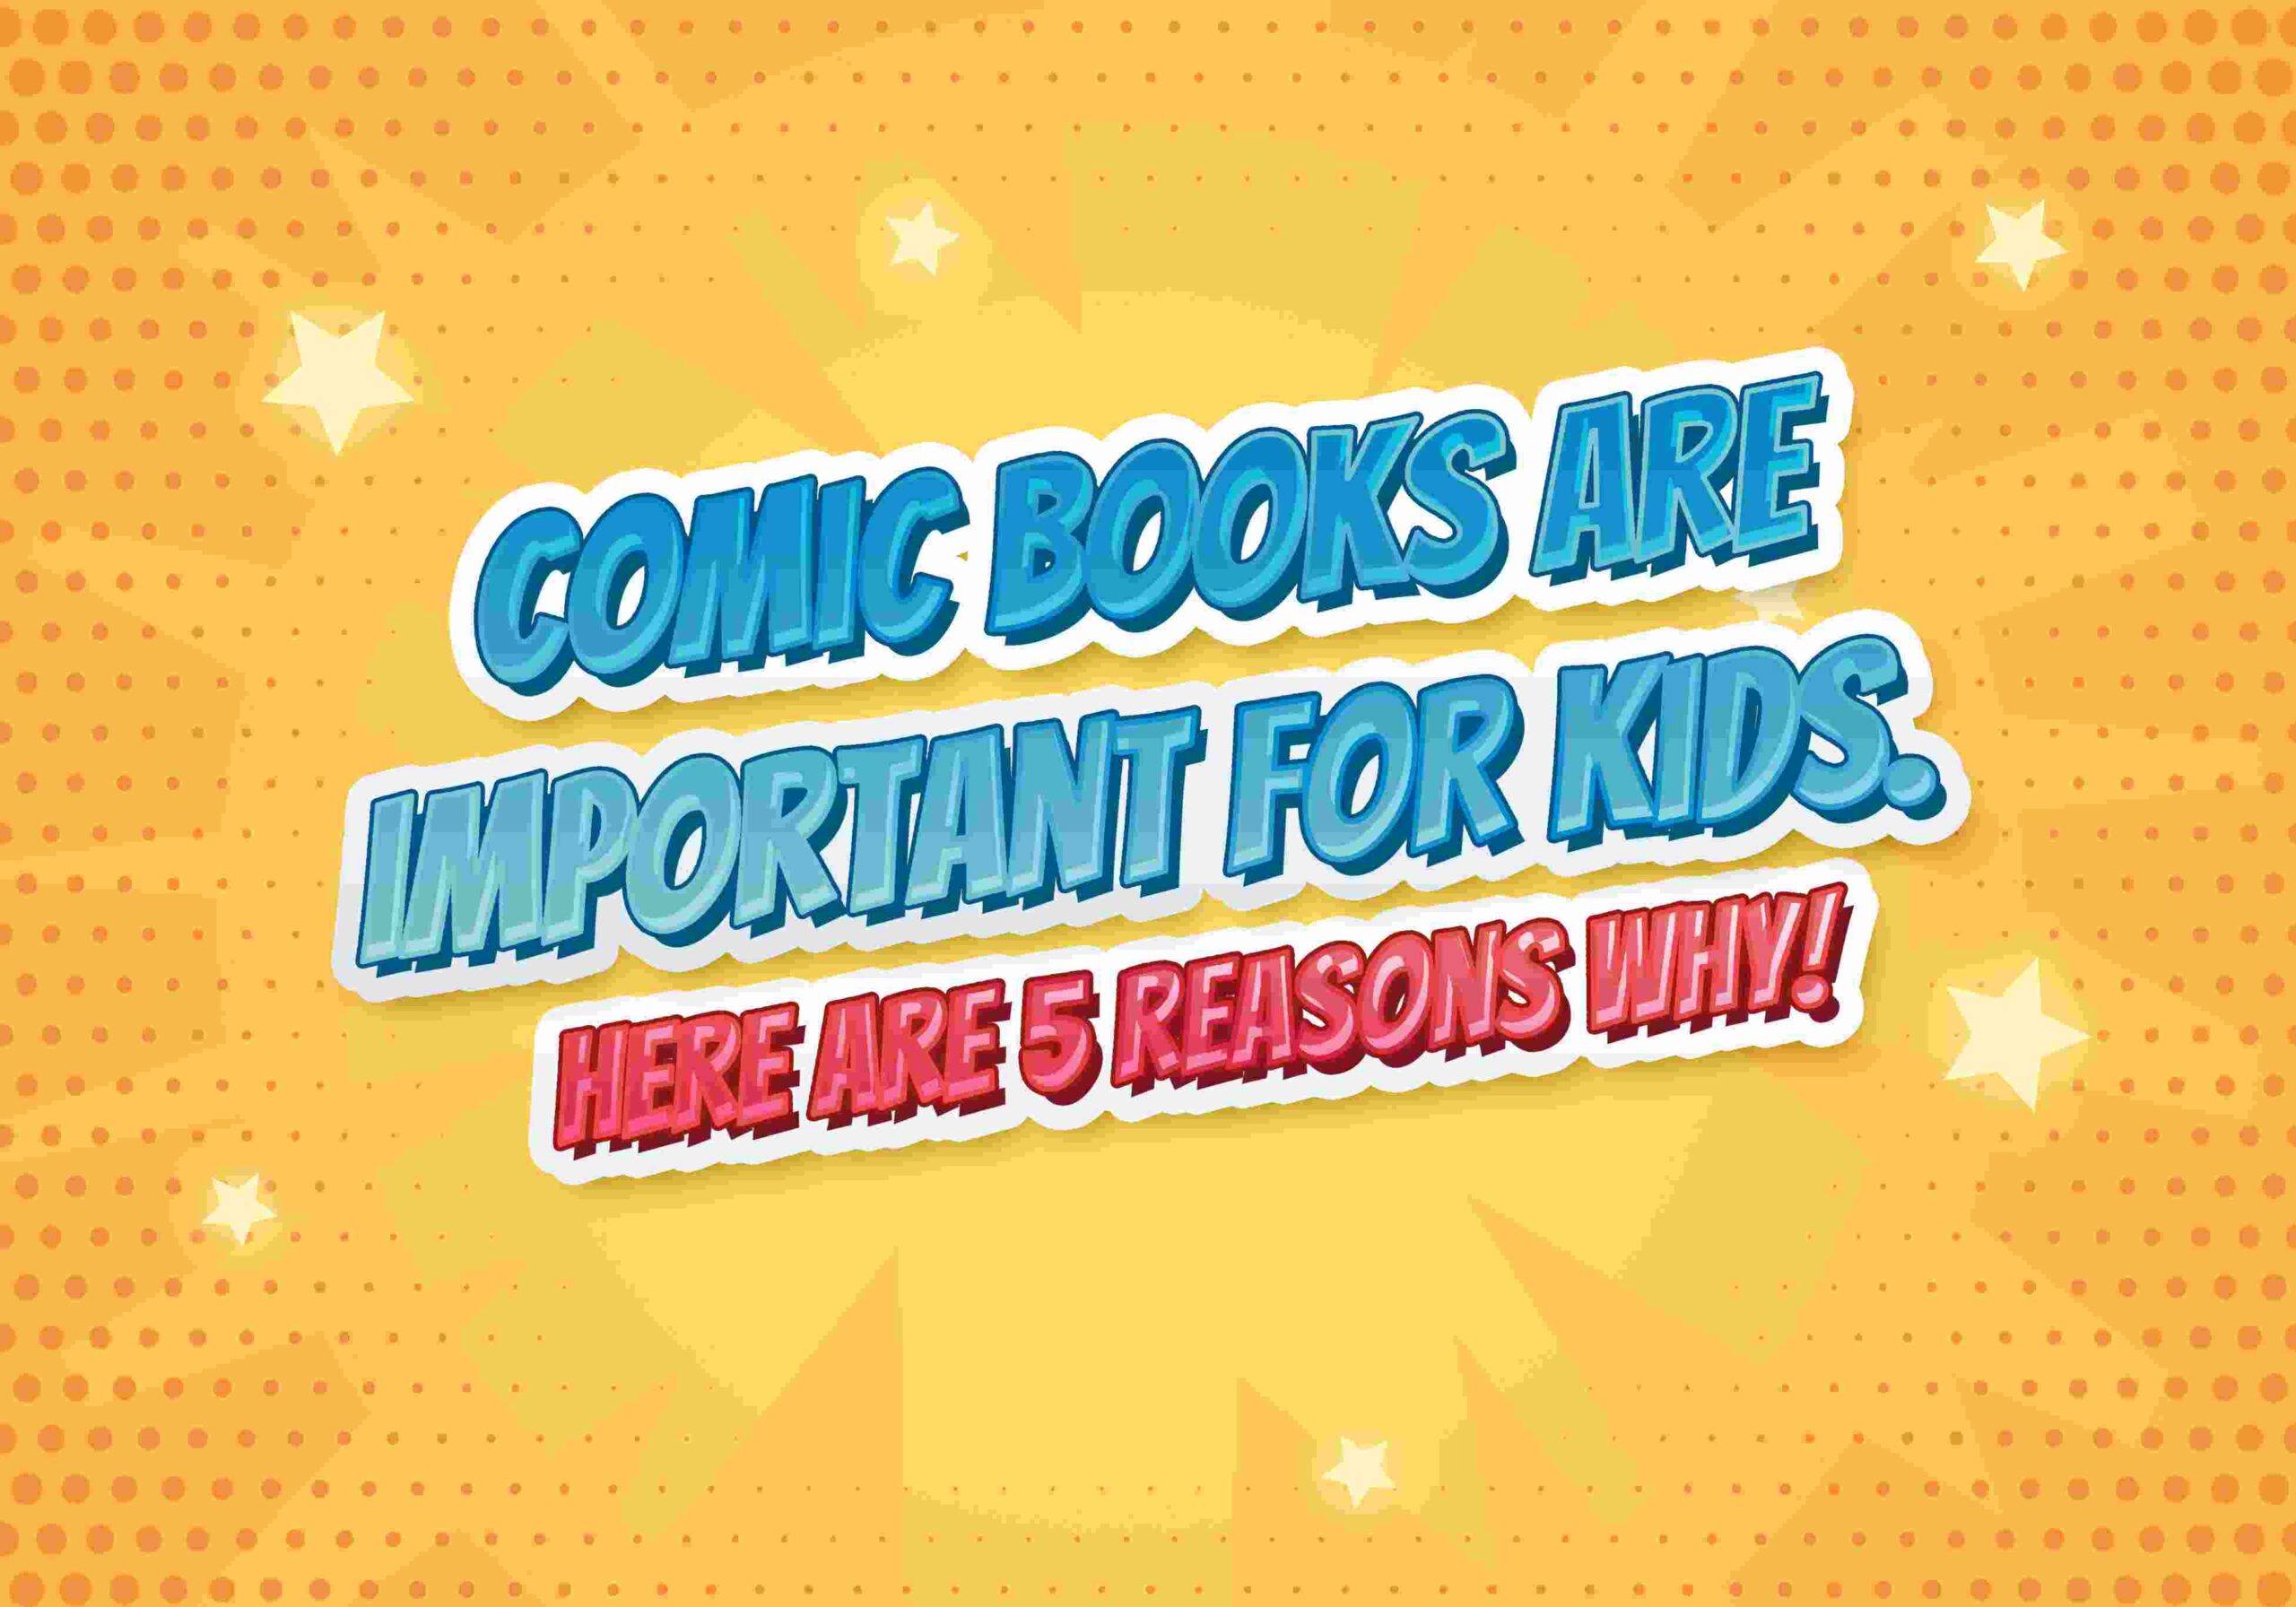 Comic Books are important for kids. Here are 5 reasons why!